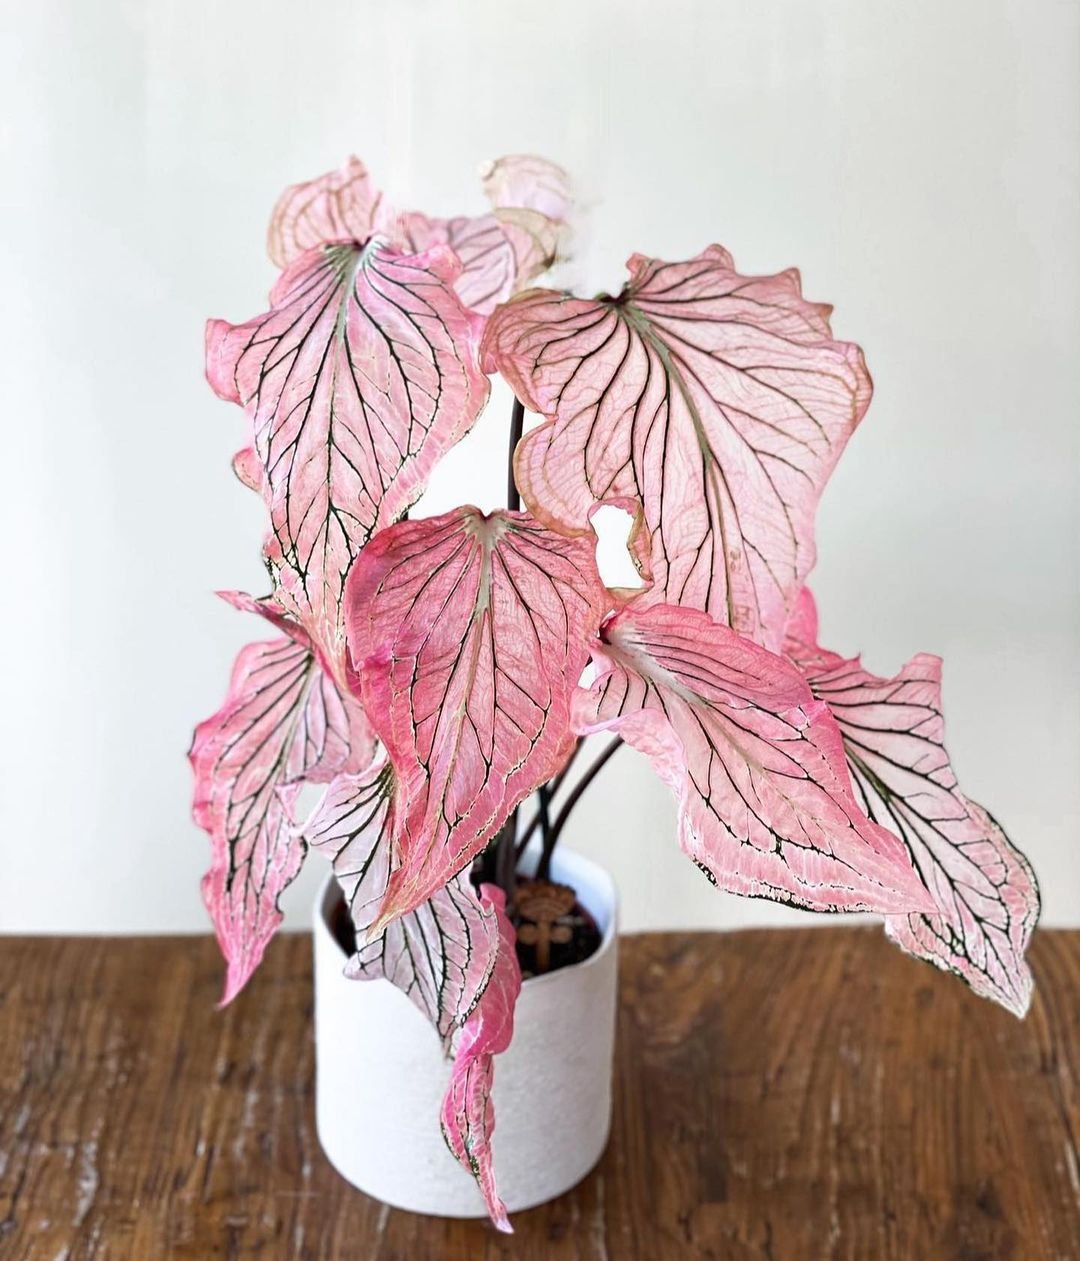 Pink-Caladium 15 Pink Houseplants To Add A Pop of Color To Your Home